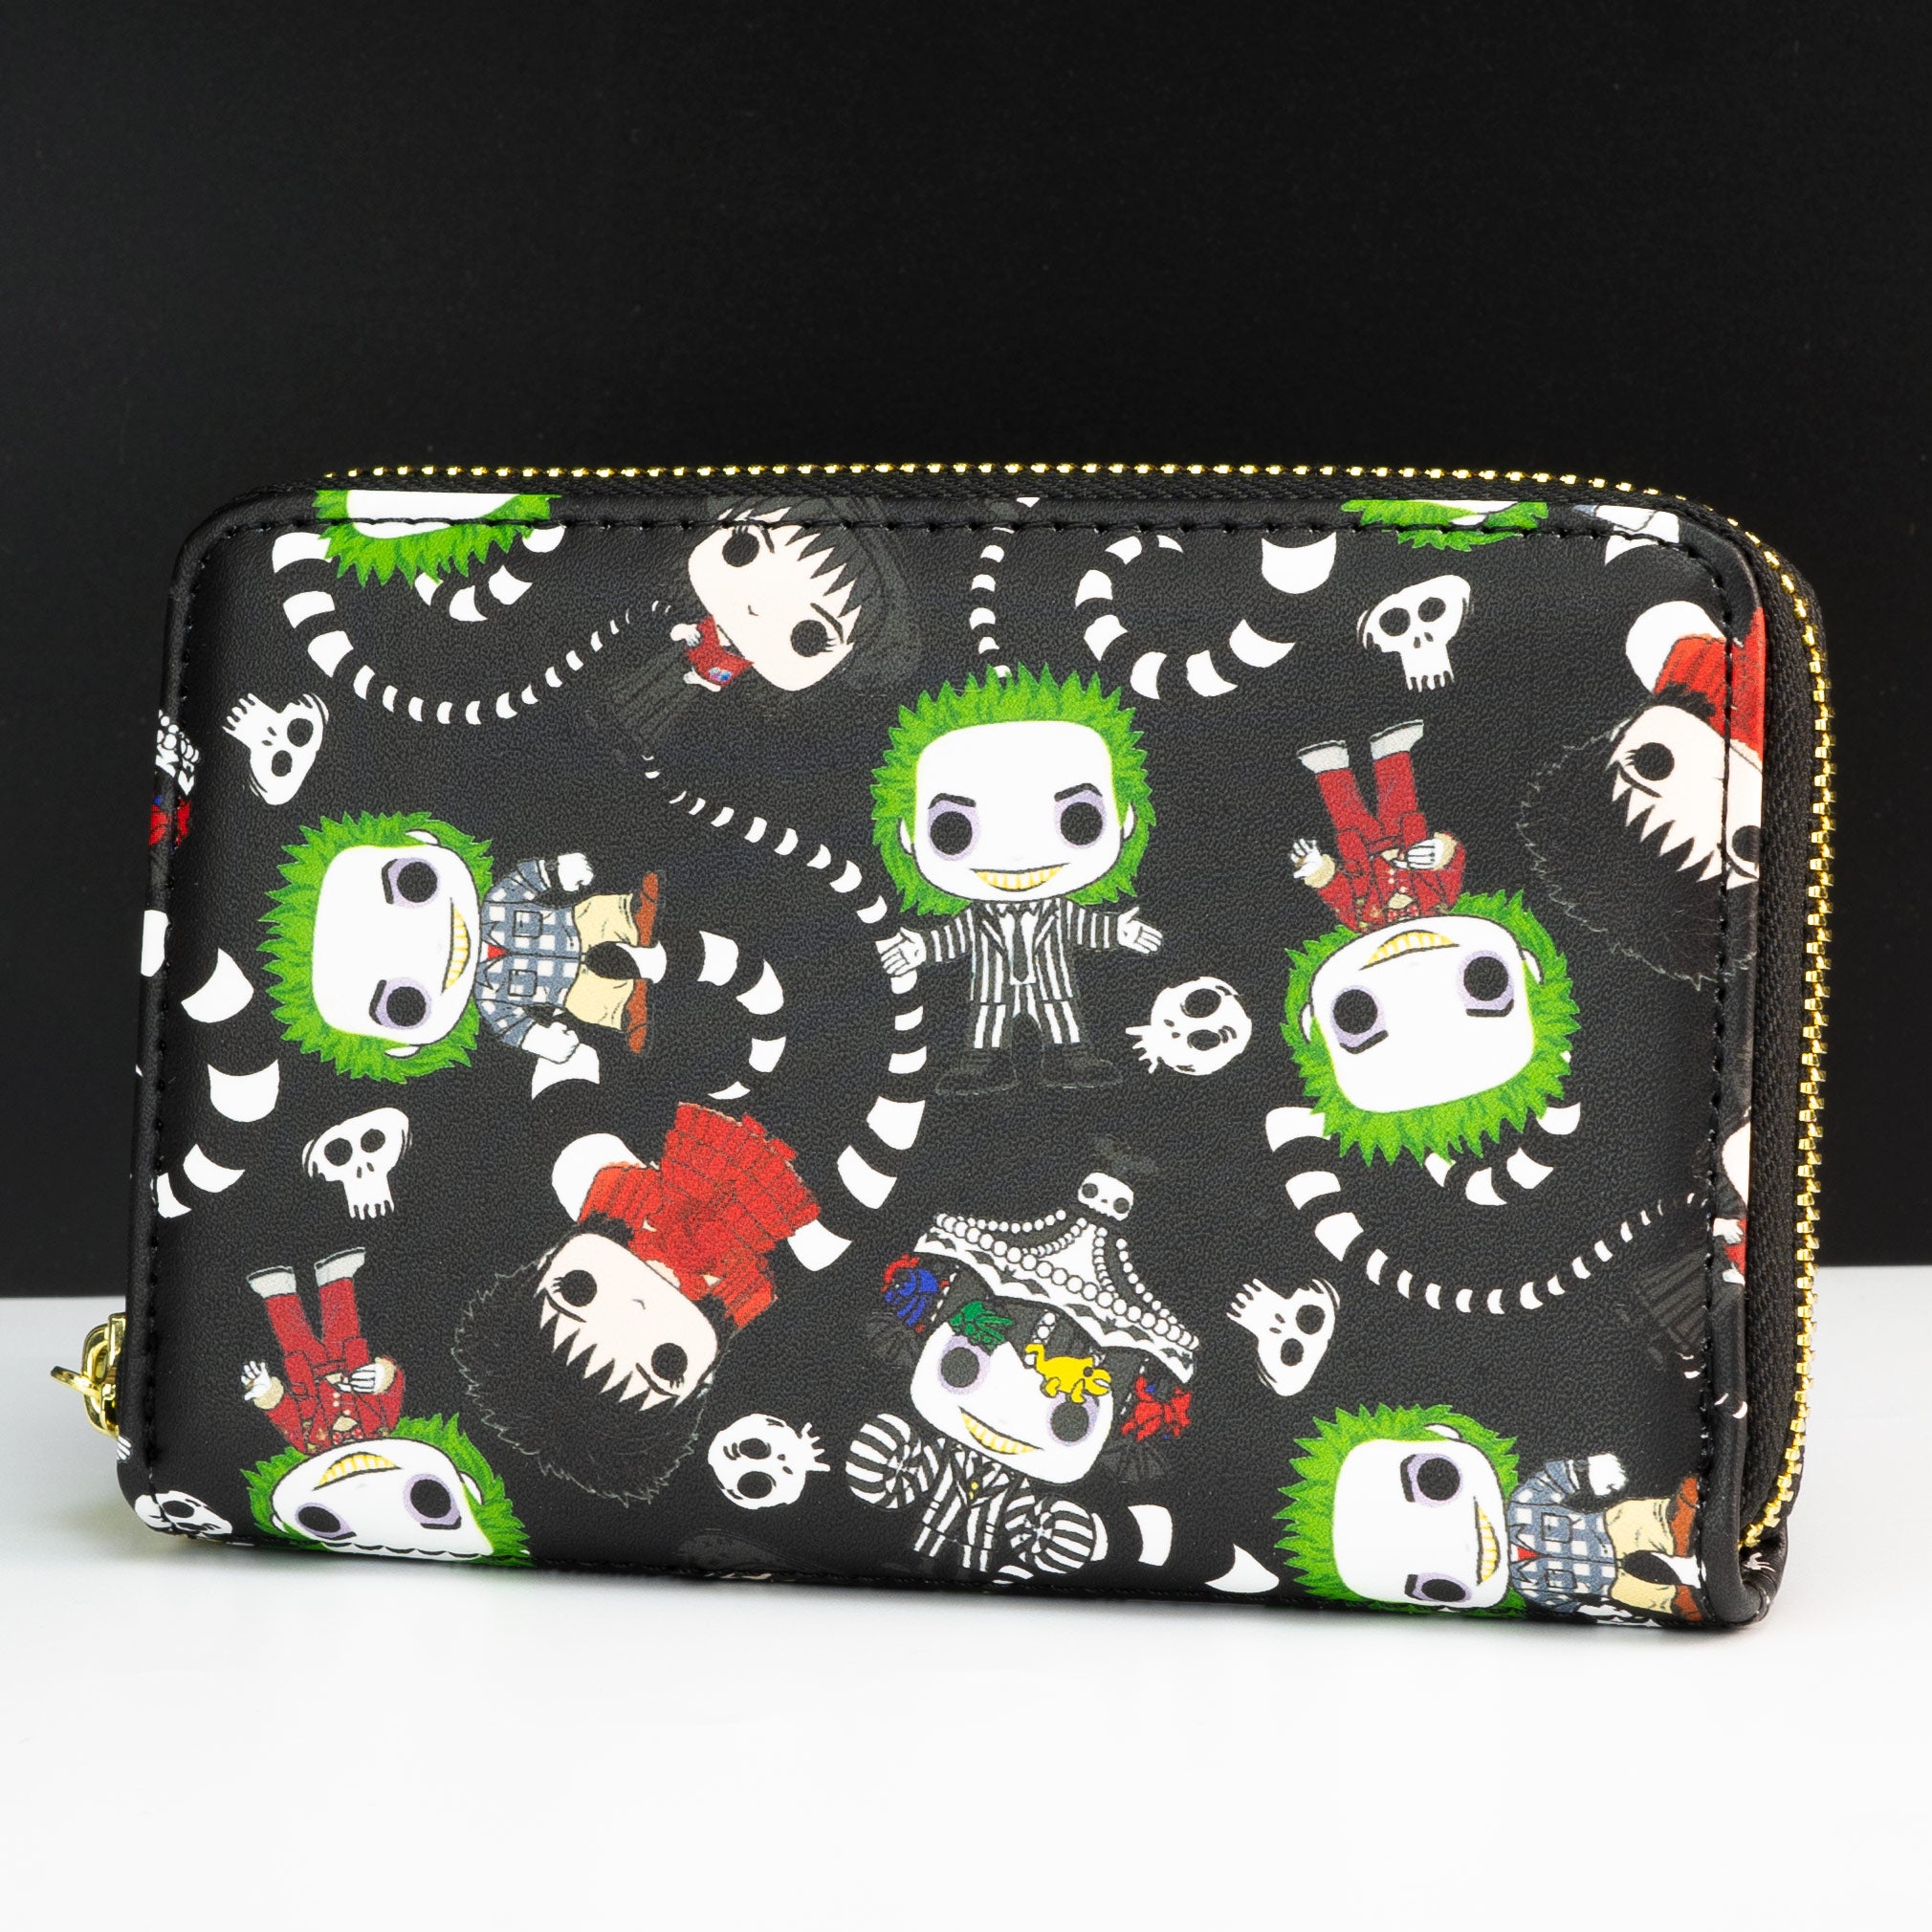 Loungefly x Beetlejuice All Over Print Purse